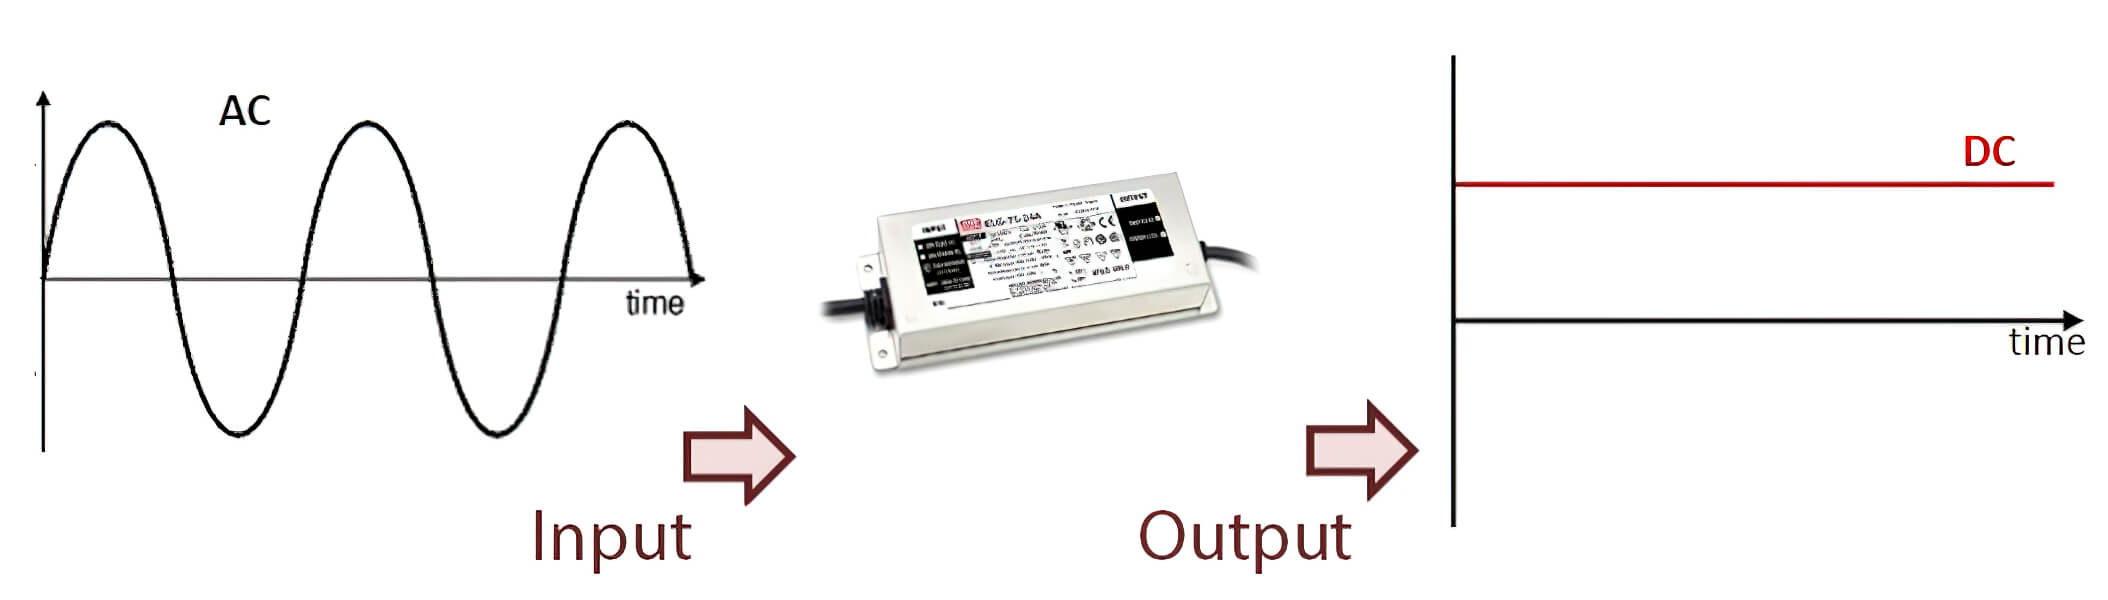 LED Driver Voltage and current requirements